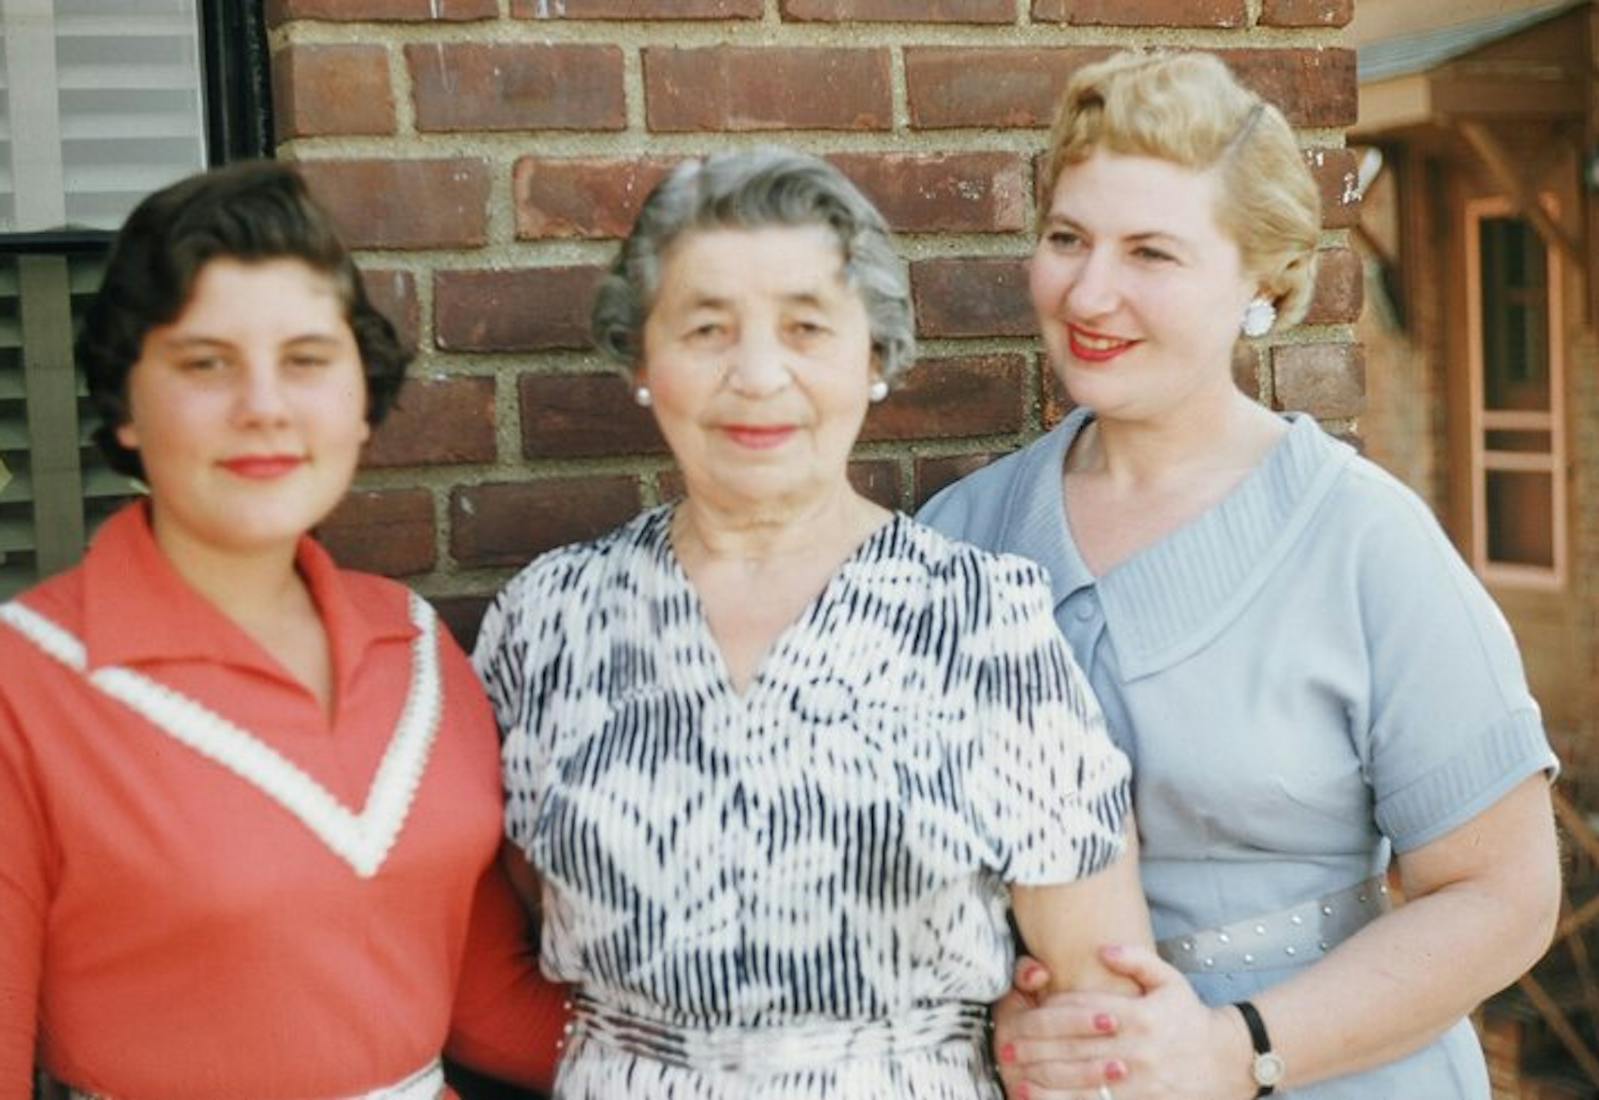 Left to right: Judy, Mama Hinda and Judy’s mother Lillian in 1958 in Belle Harbor.